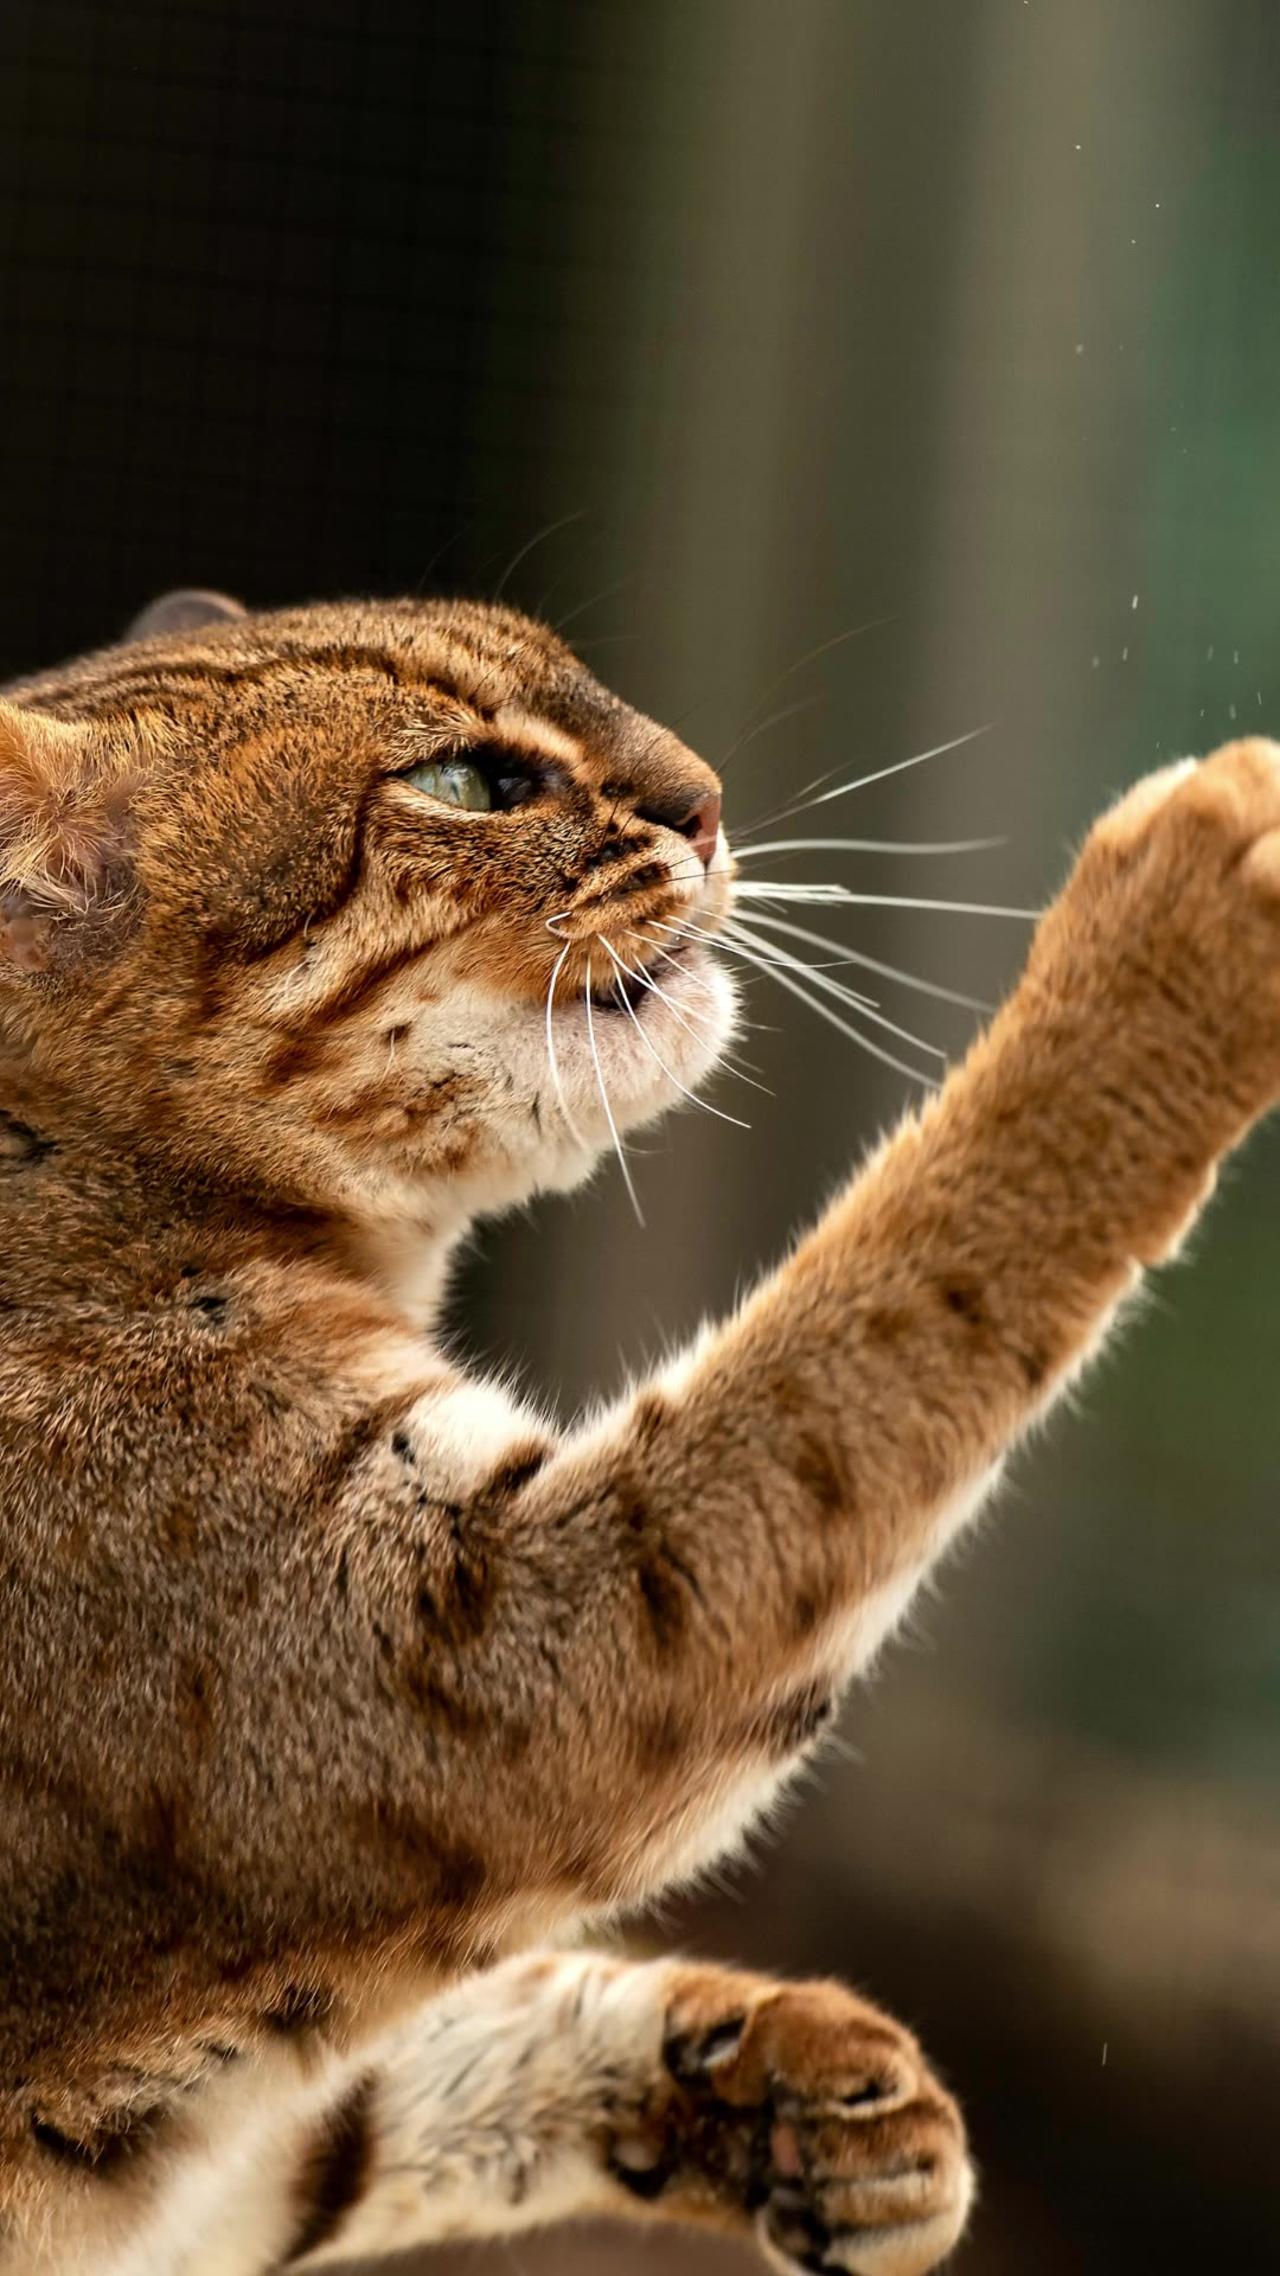 Meet the World's Smallest Cat - Rusty spotted Cat